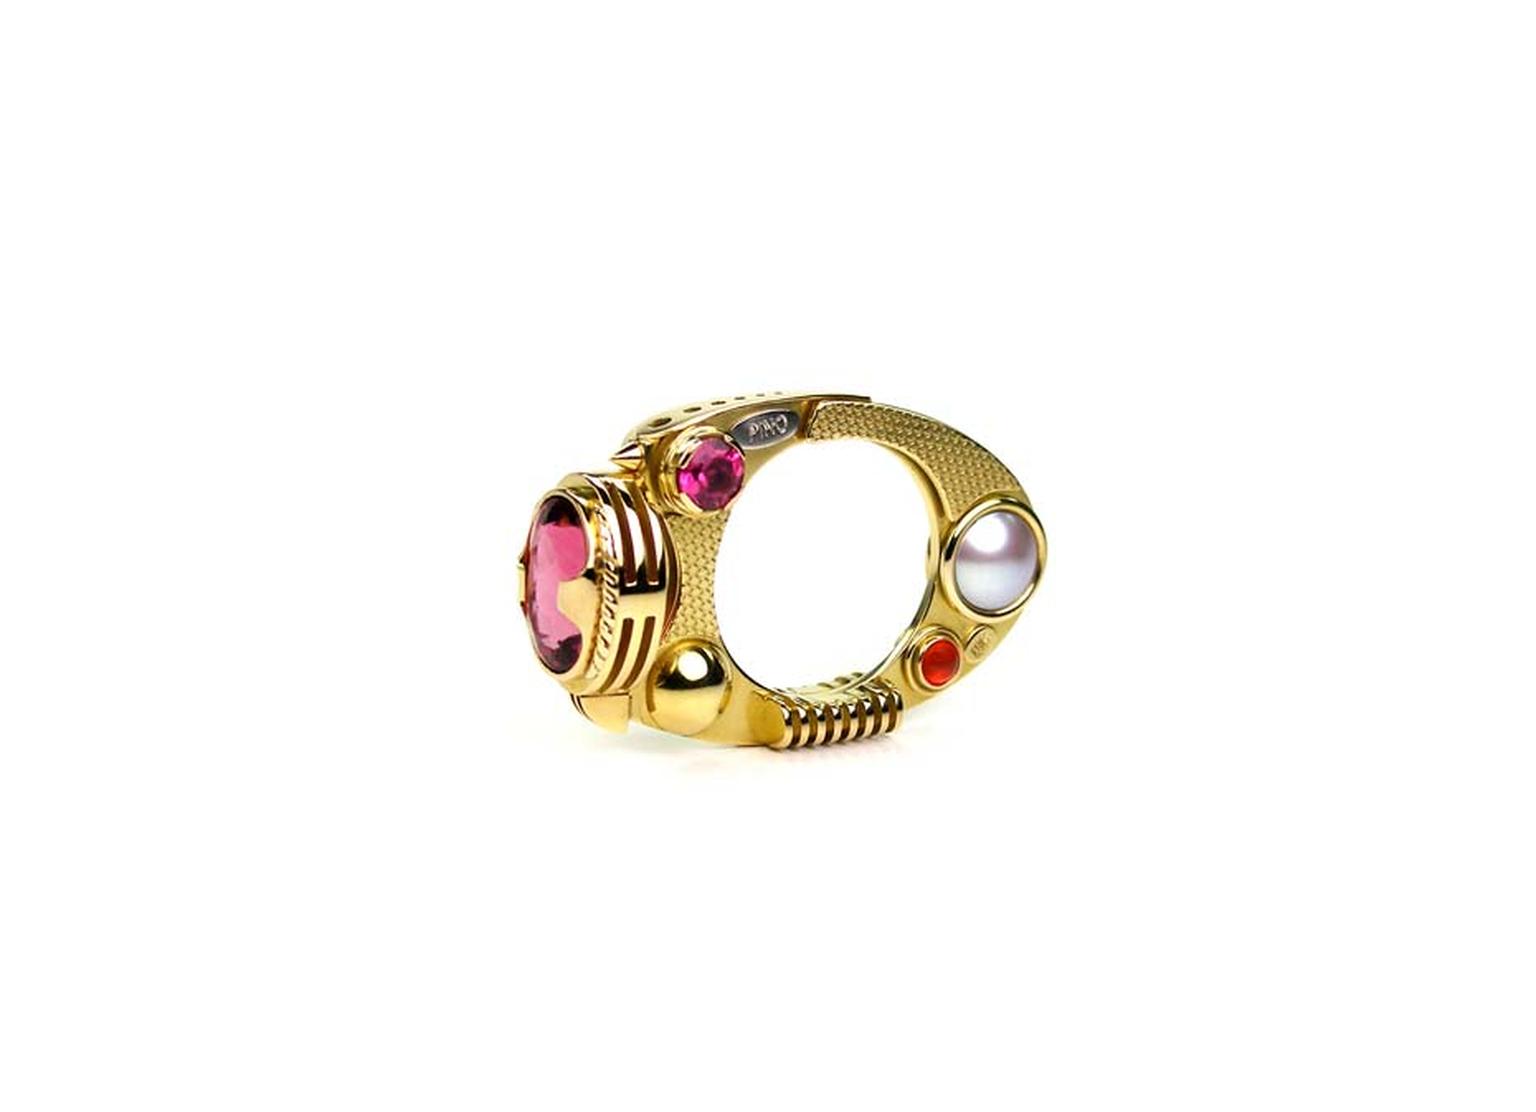 Claudio Pino ring in gold with pink tourmalines, pearls and carnelian at the Aaron Faber Gallery.